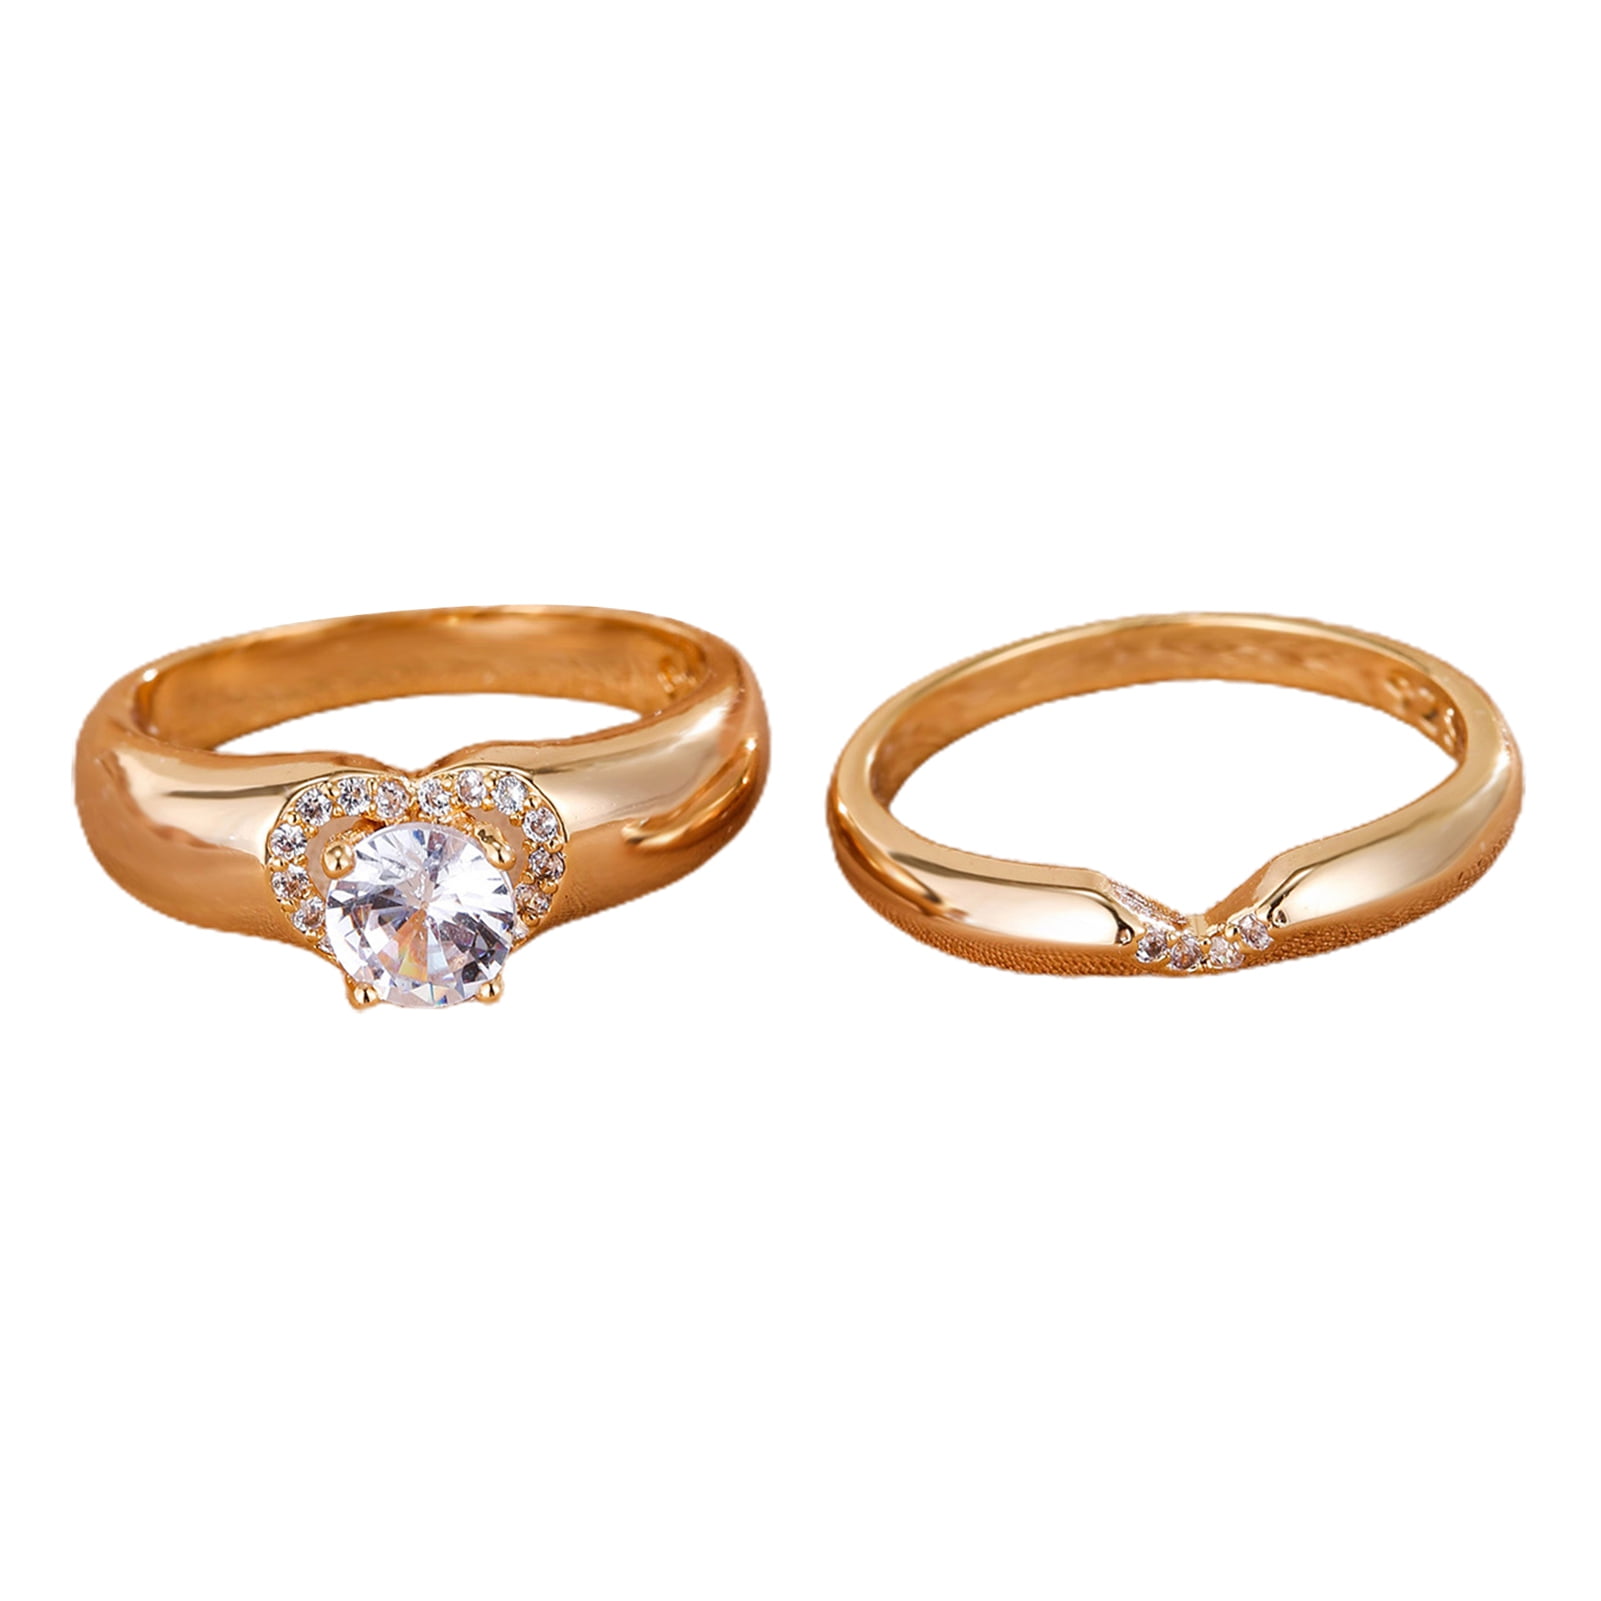 Buy Gold Finish Designer Couple Rings Embedded with Sparkling American  Diamond Online | Anuradha … | Couple ring design, Engagement rings couple,  Gold rings fashion